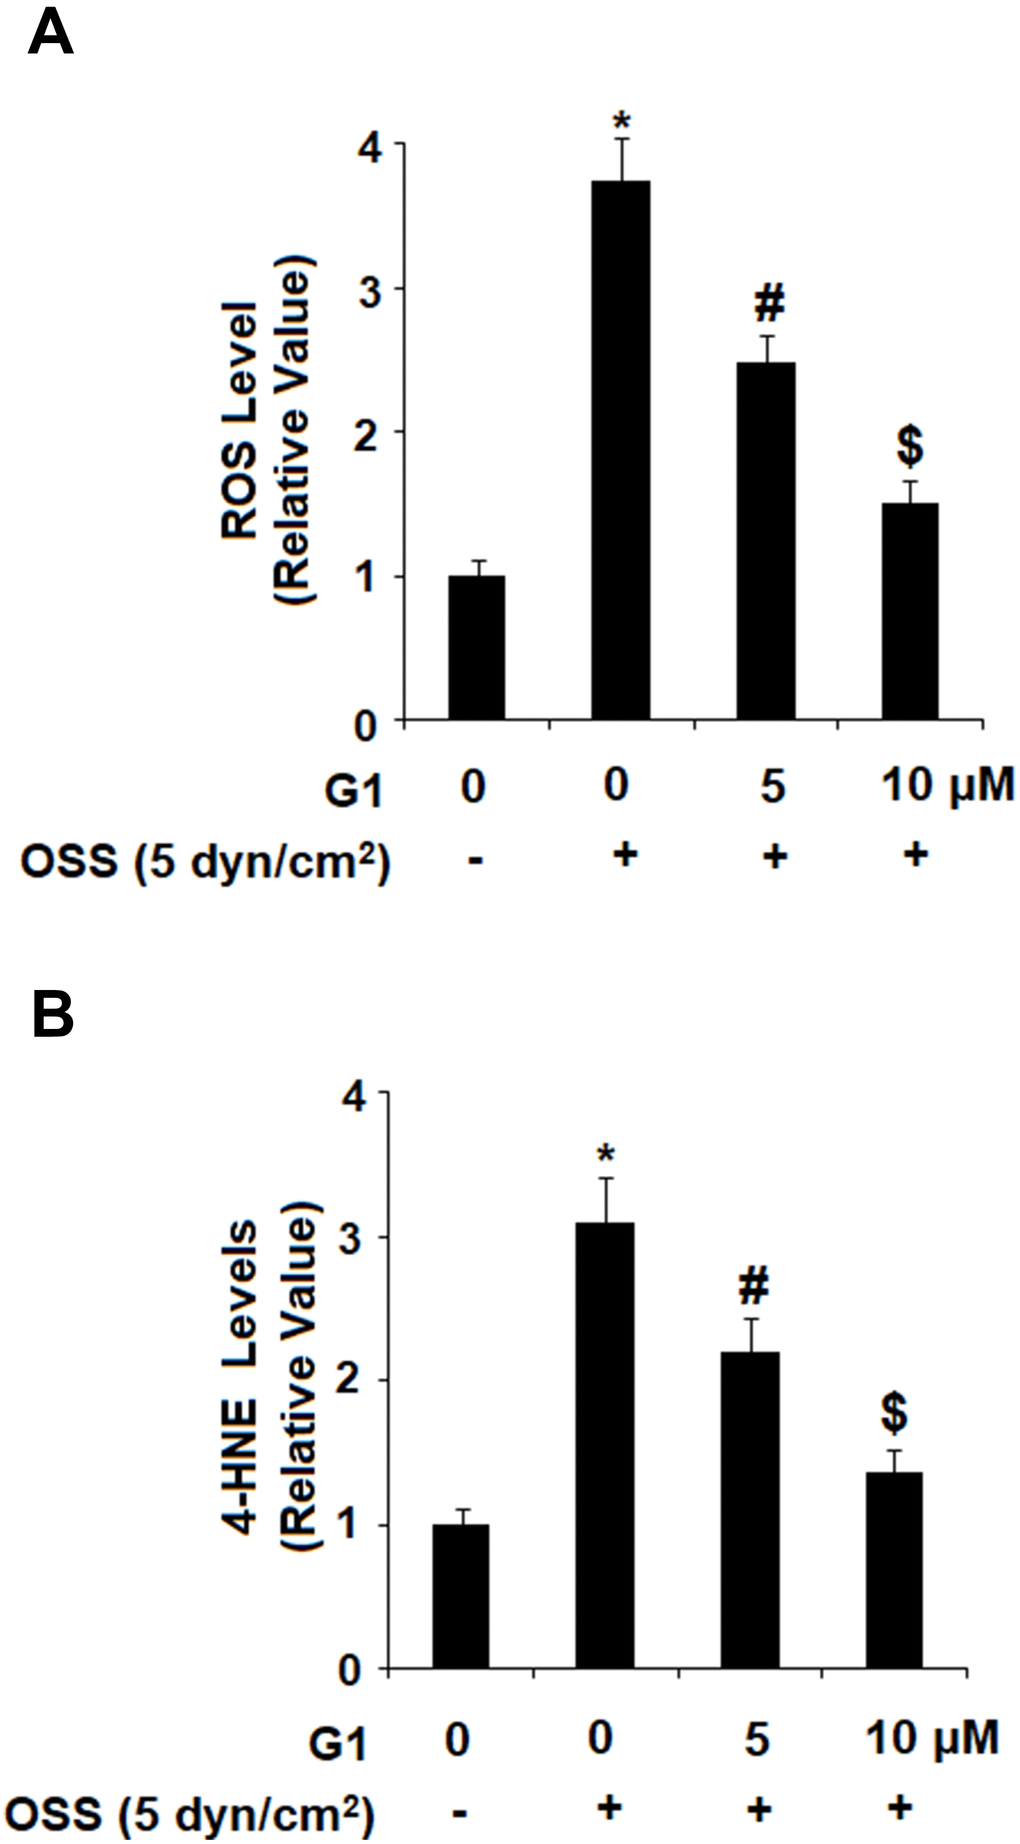 Agonism of GPR30 using its specific agonist G1 suppressed oscillatory shear stress (OSS)-induced oxidative stress in HAECs. HAECs were exposed with OSS (5 dyn/cm2) in the presence or absence of 5, 10 μM G1 for 24 h. (A). Levels of intracellular reactive oxygen species (ROS) were determined by DCFH-DA staining; (B). Levels of intracellular 4-hydroxynonenal (4-HNE) were determined by immunostaining (*, #, $, P